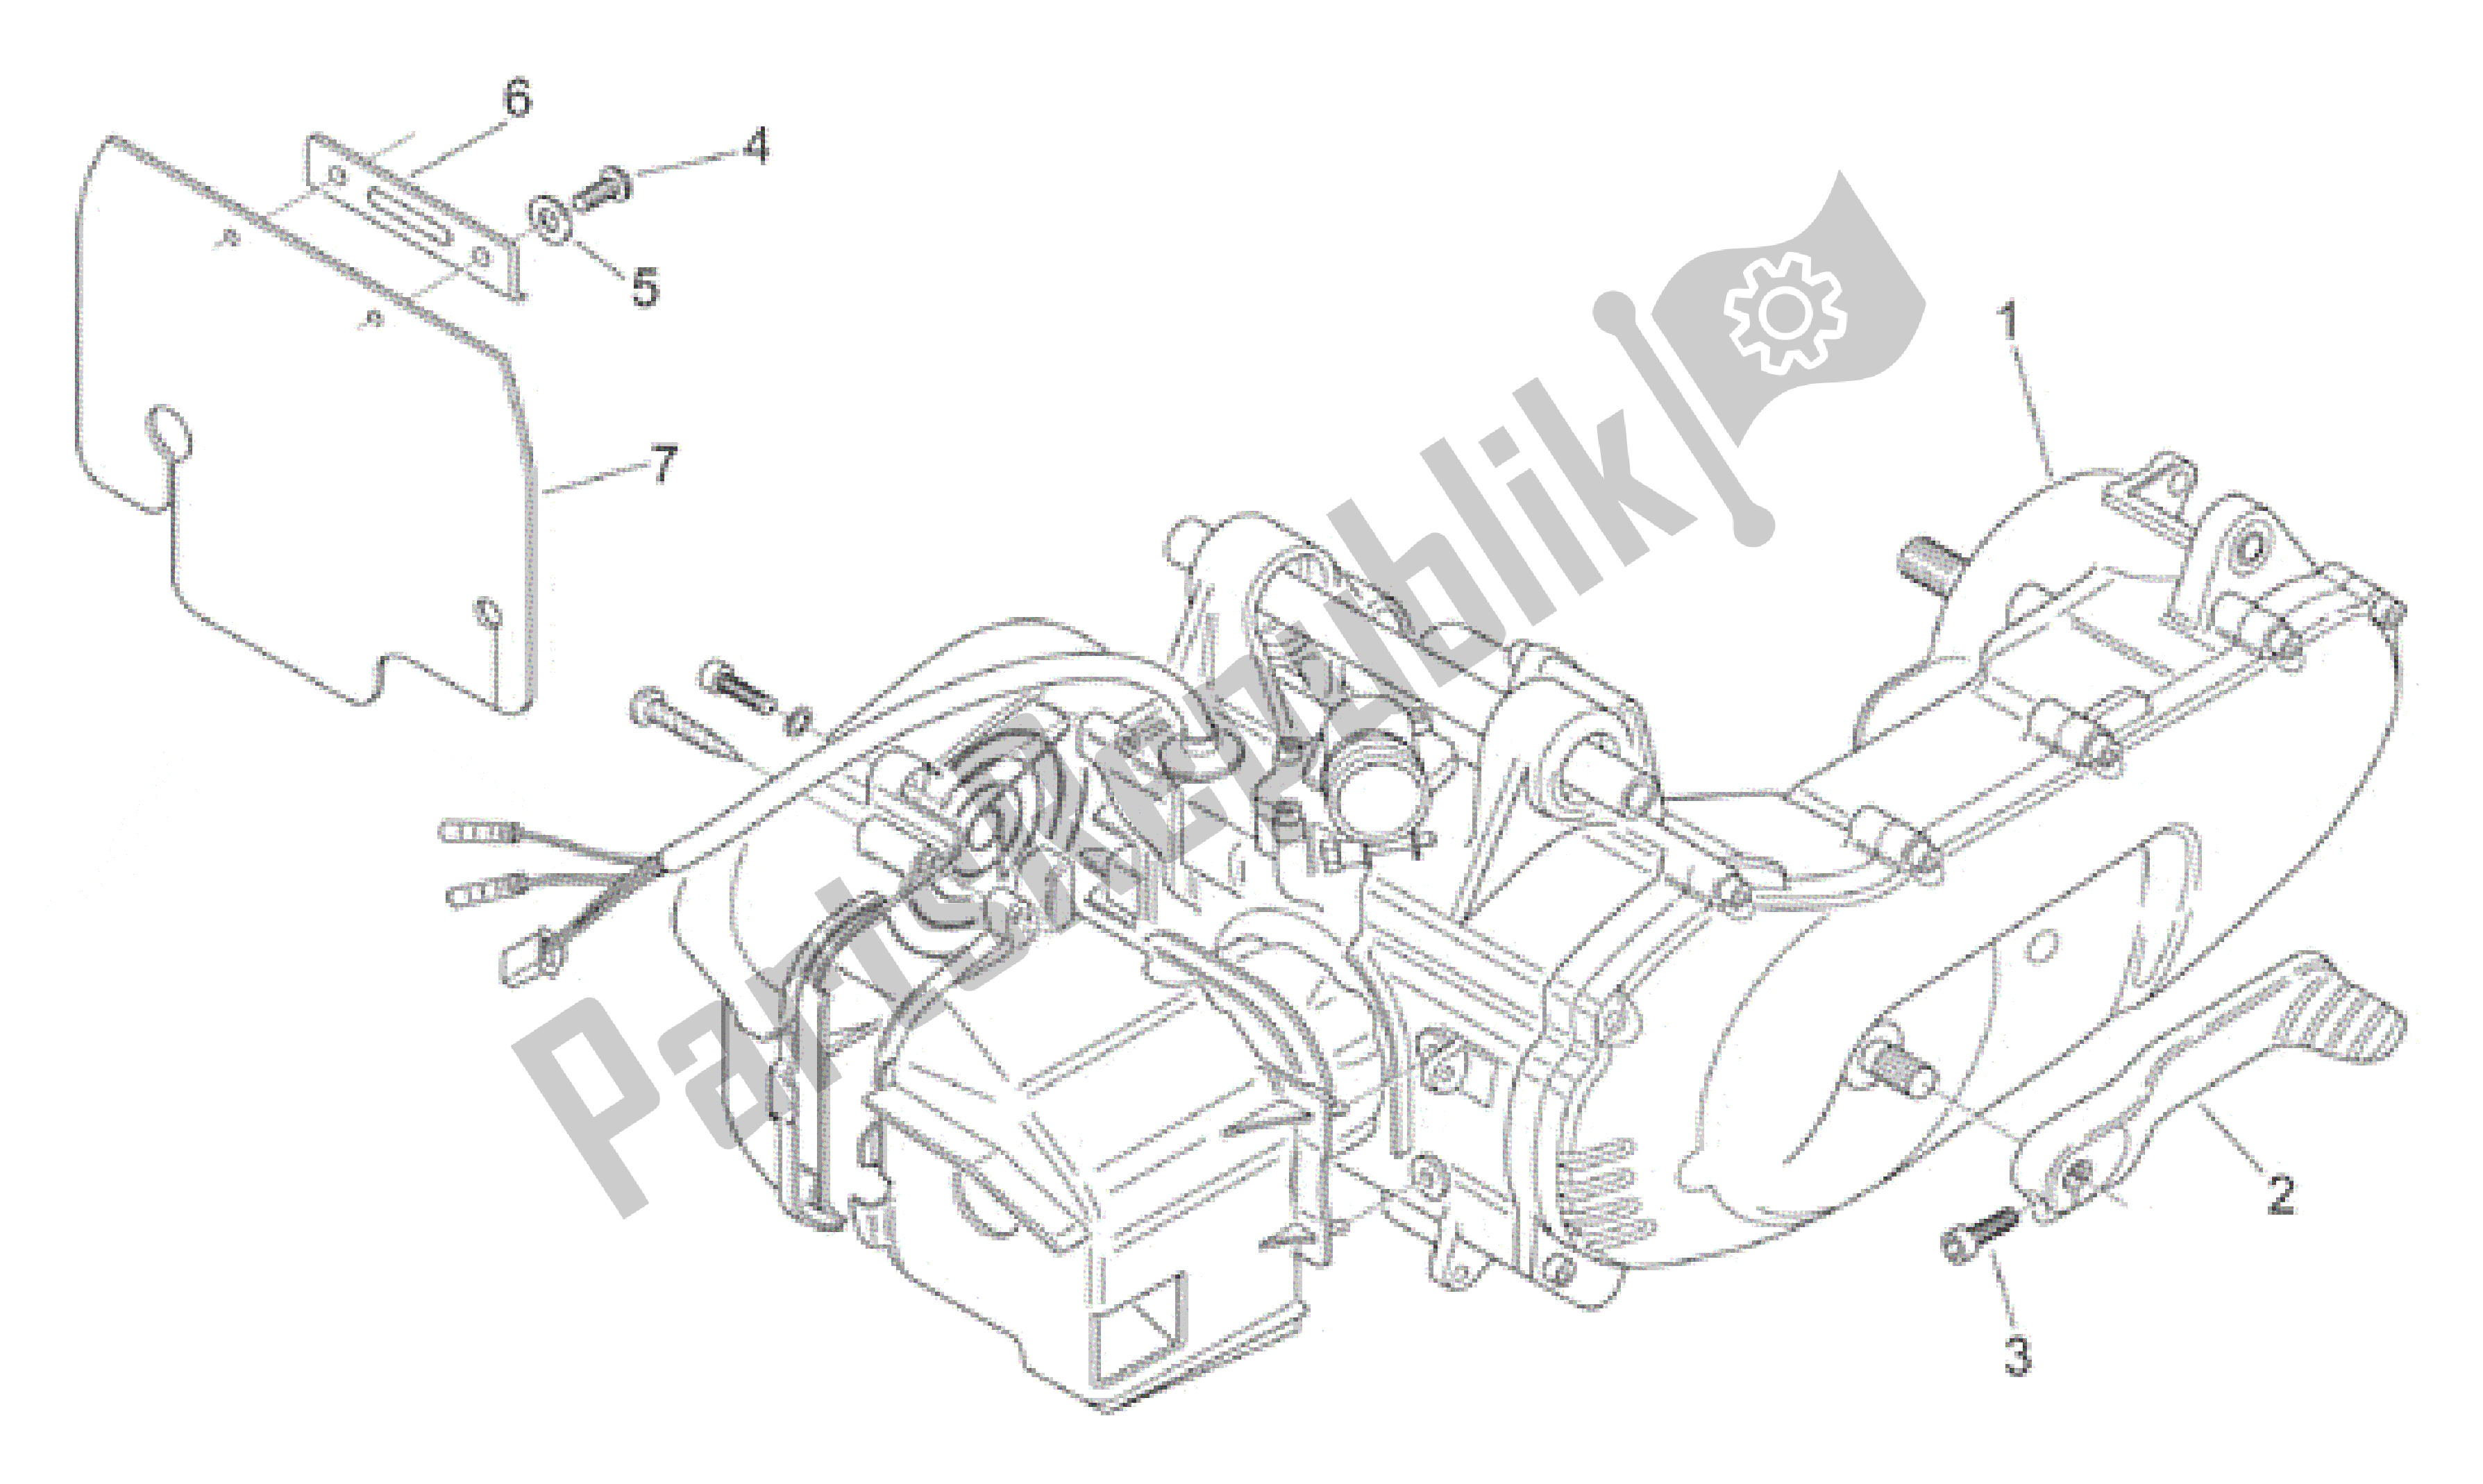 All parts for the Engine of the Aprilia Scarabeo 50 1998